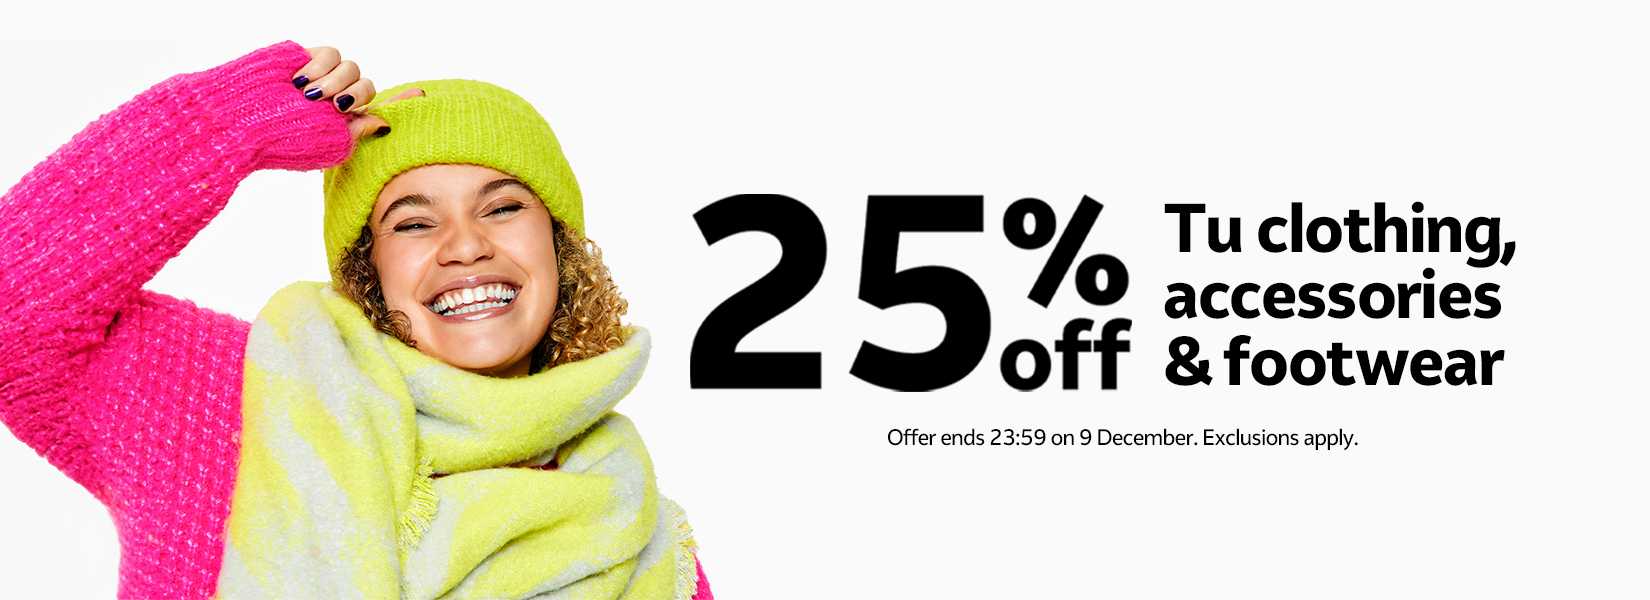 25% off Tu clothing, accessories and footwear. Offer ends 23:59 on 9 December. Exclusions apply.